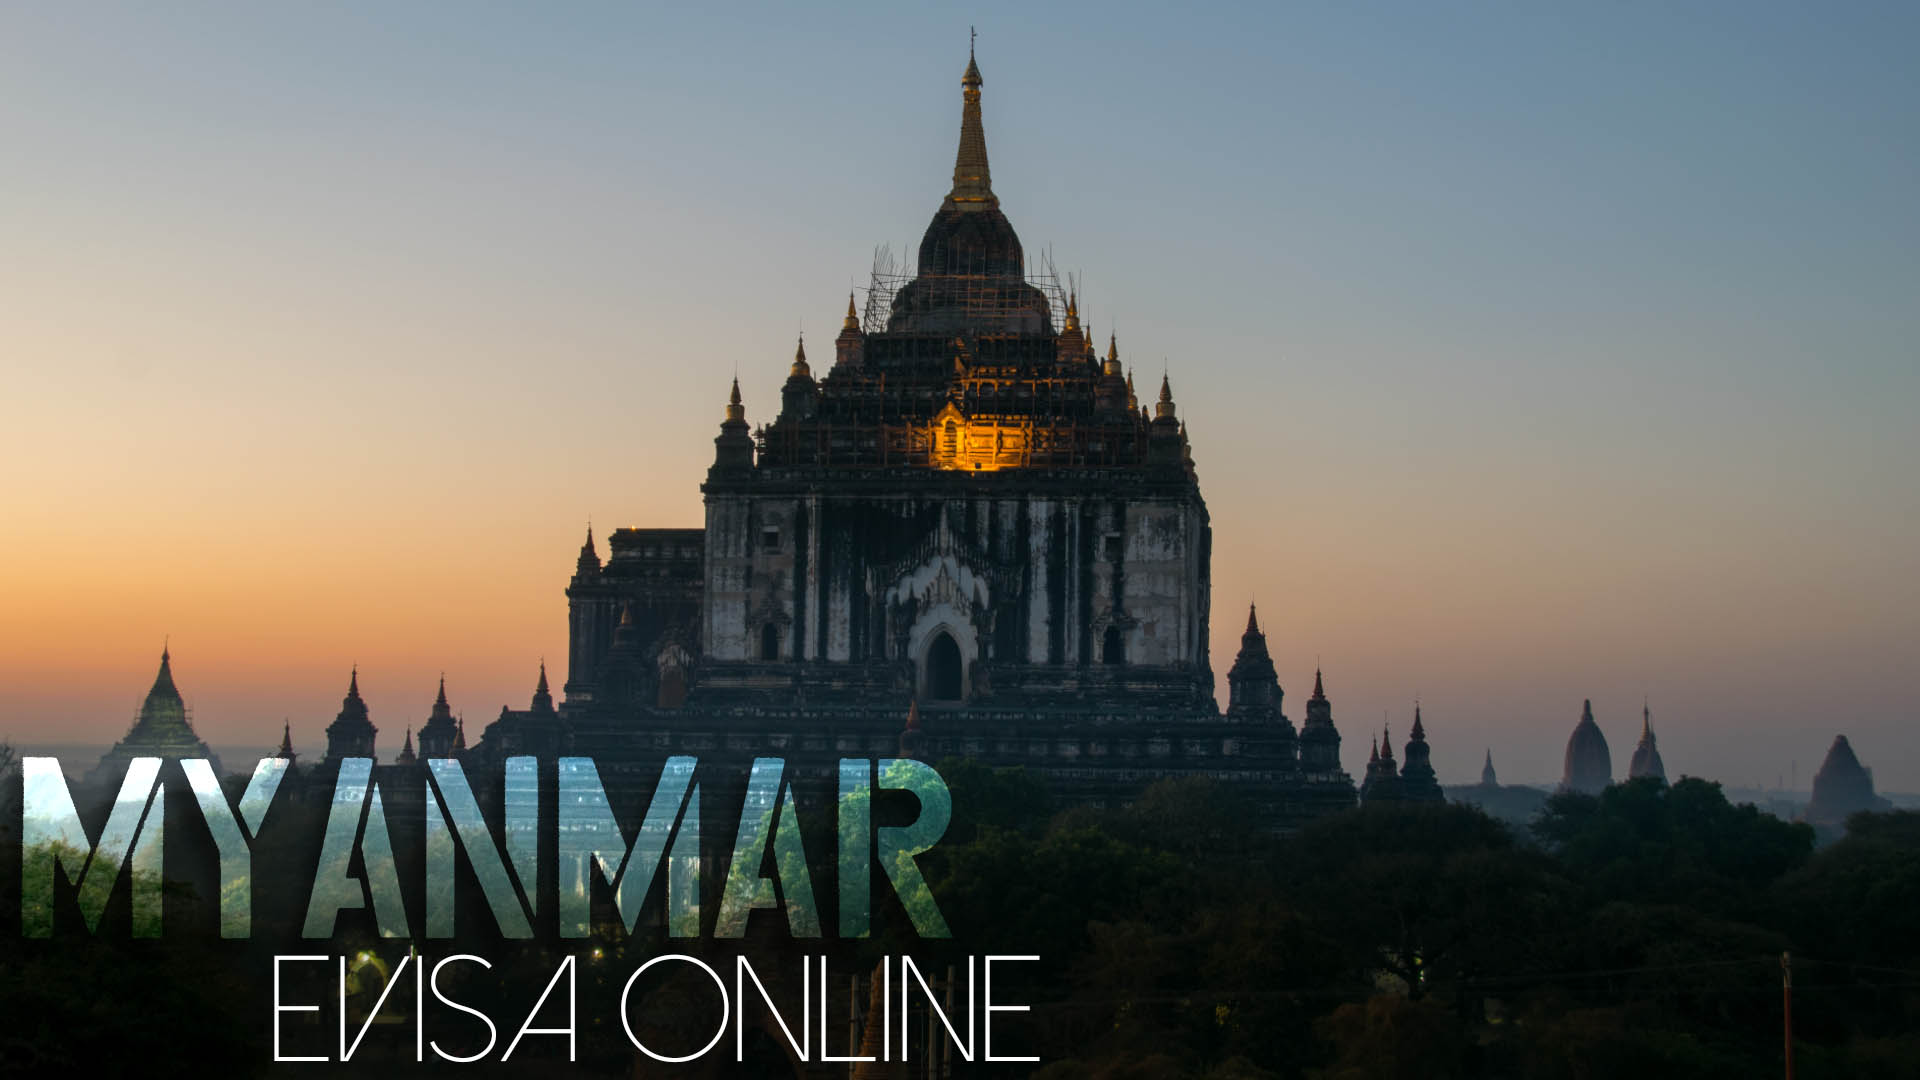 Featured image with text Myanmar Evisa online - Sunrise over temples of Bagan